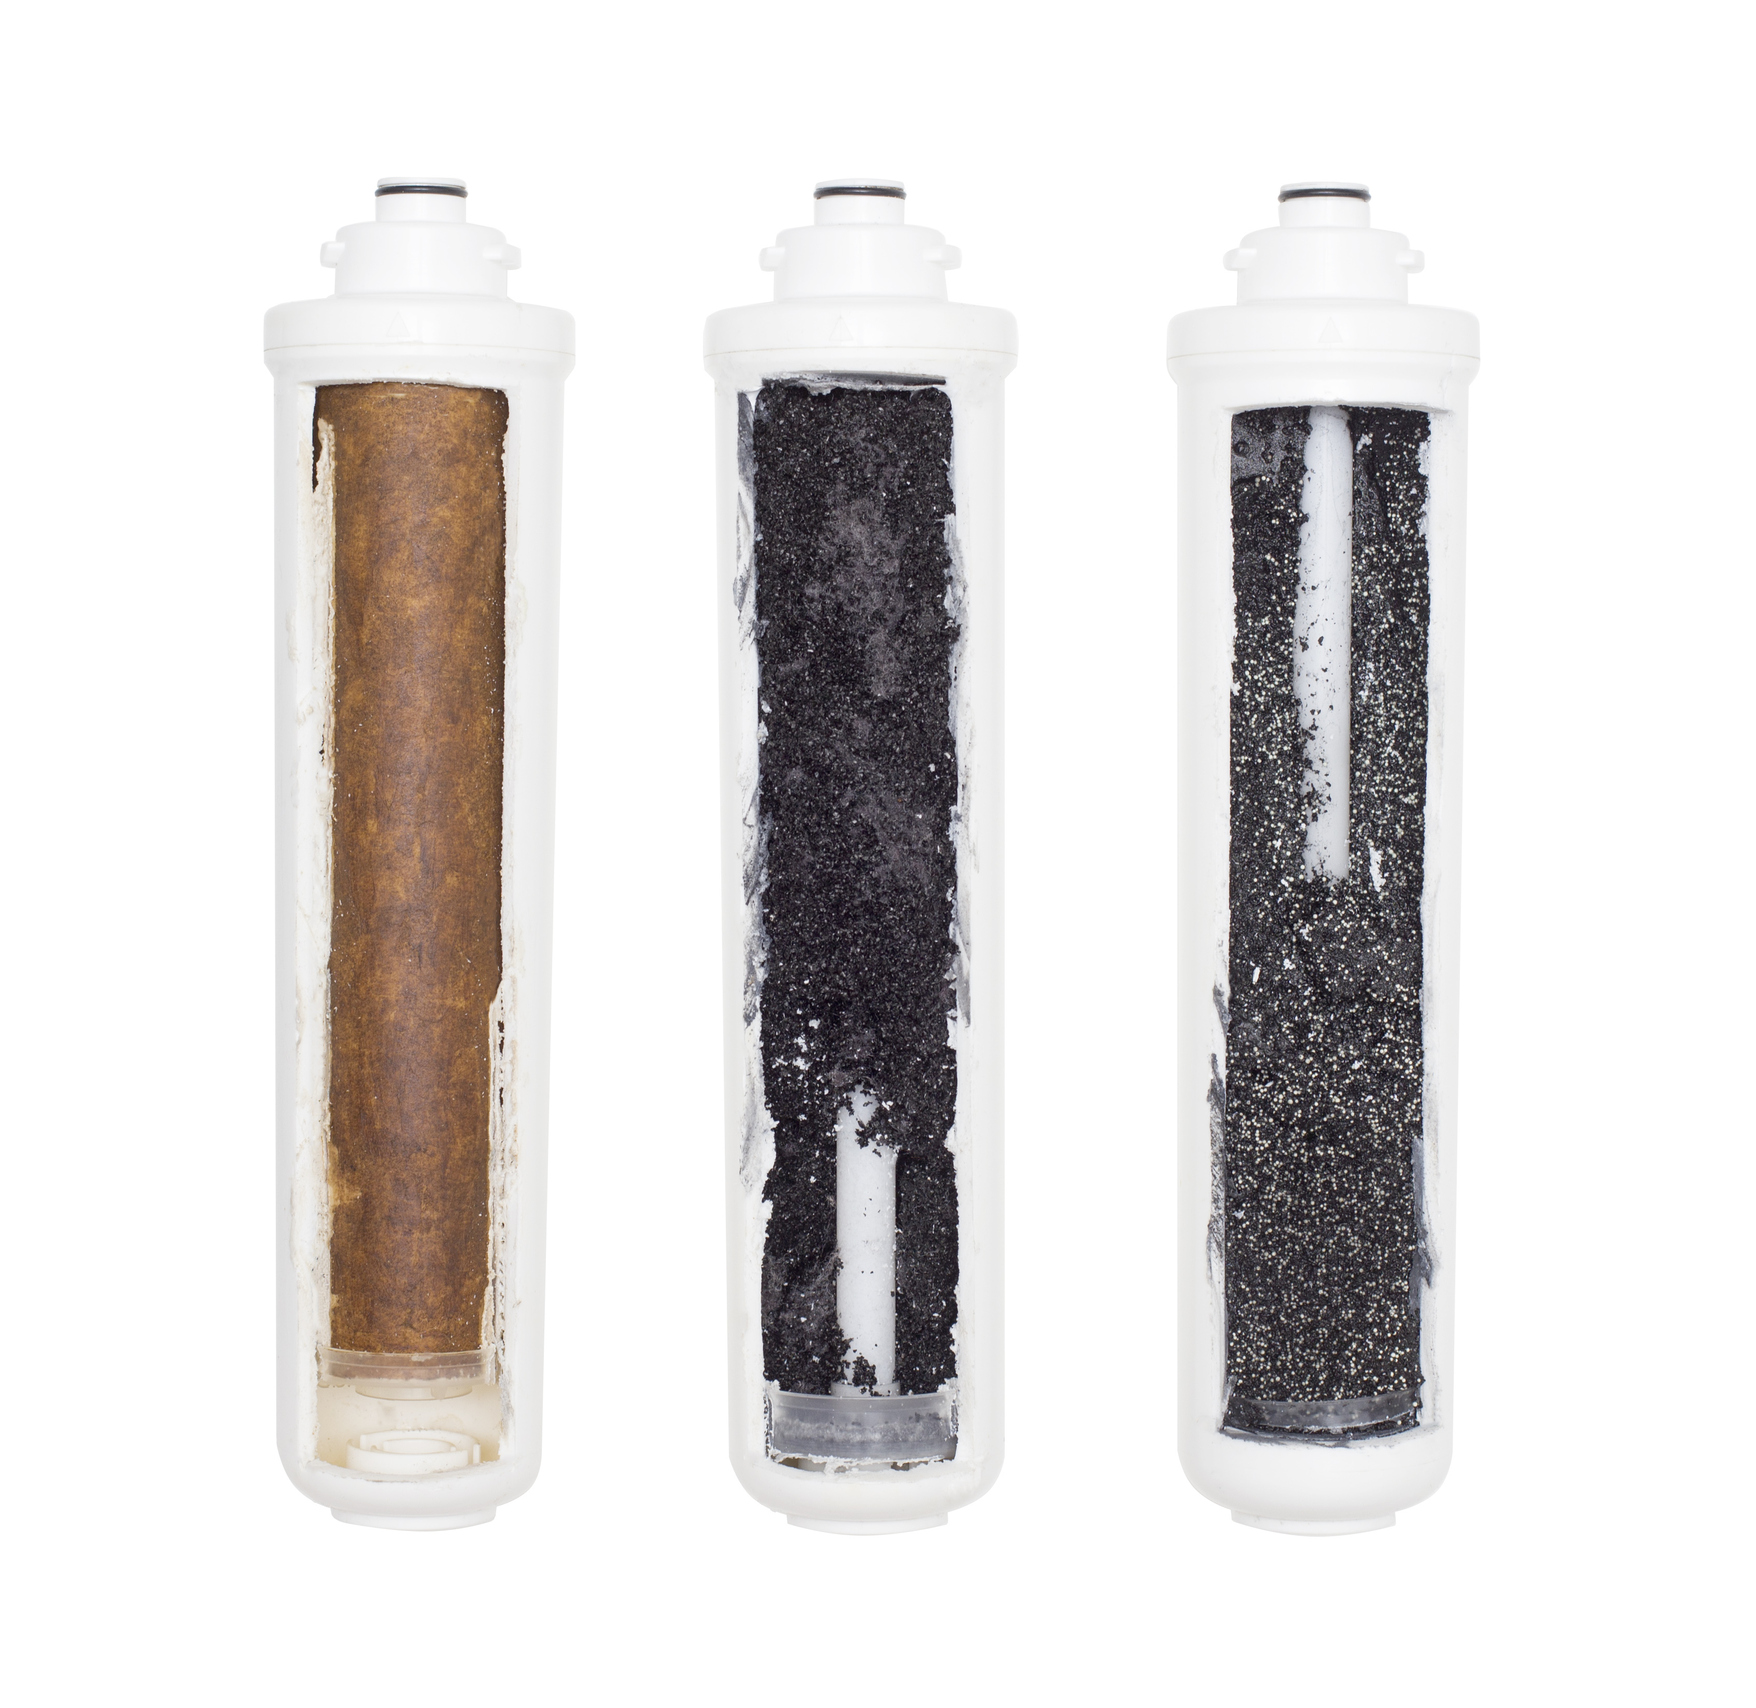 Choosing the right replacement water filter cartridges is important to remove impurities from water